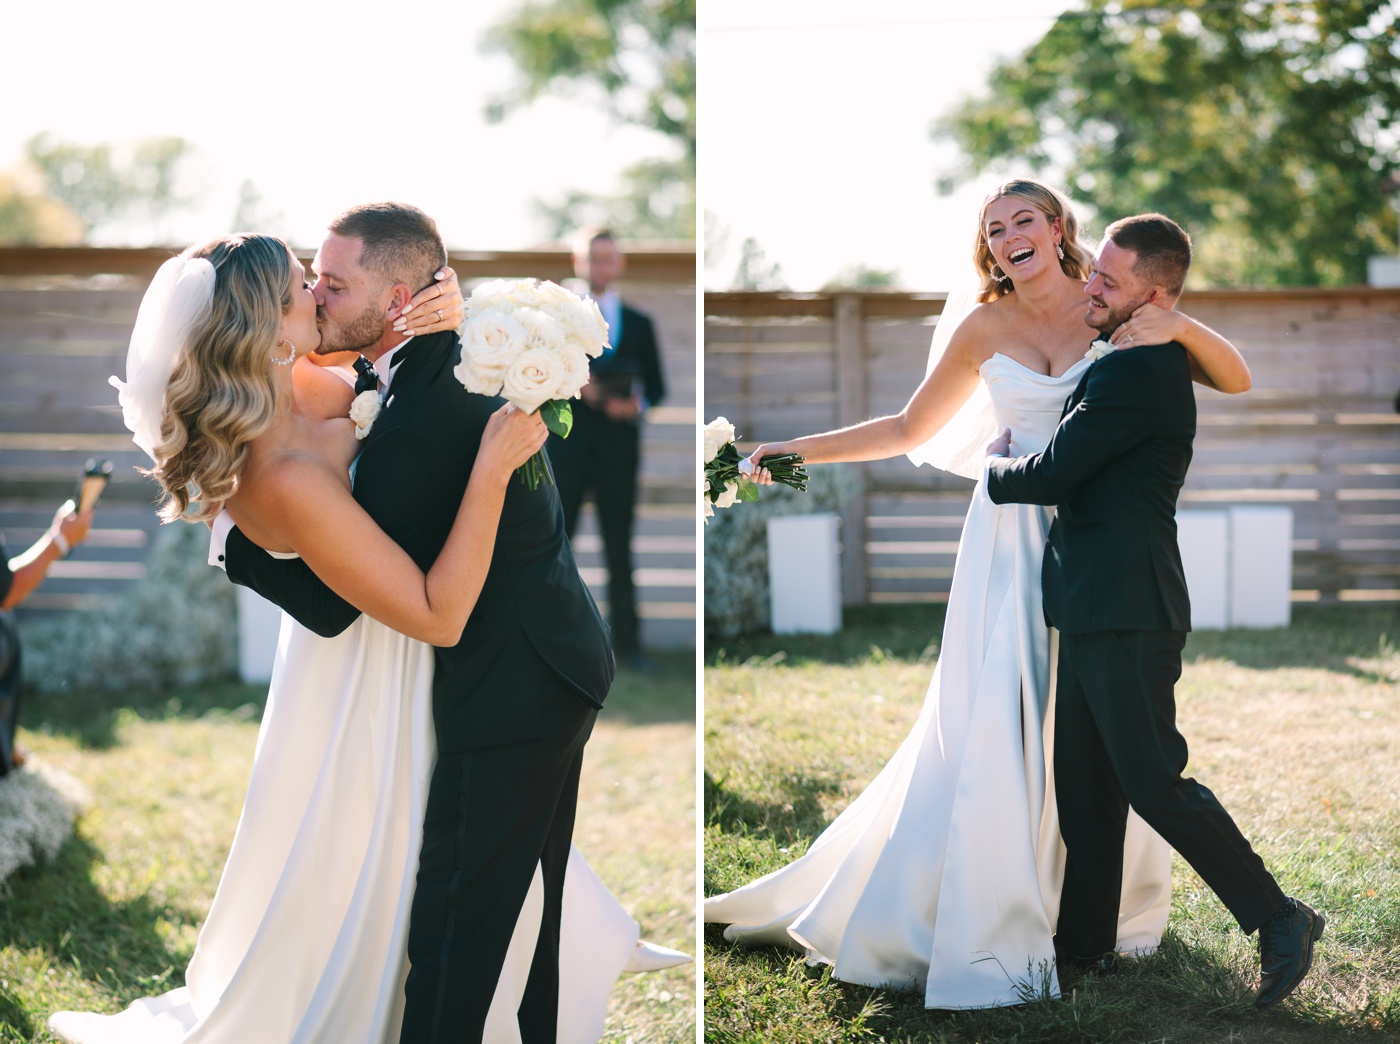 Mika LH - Indianapolis, IN Wedding Photographer